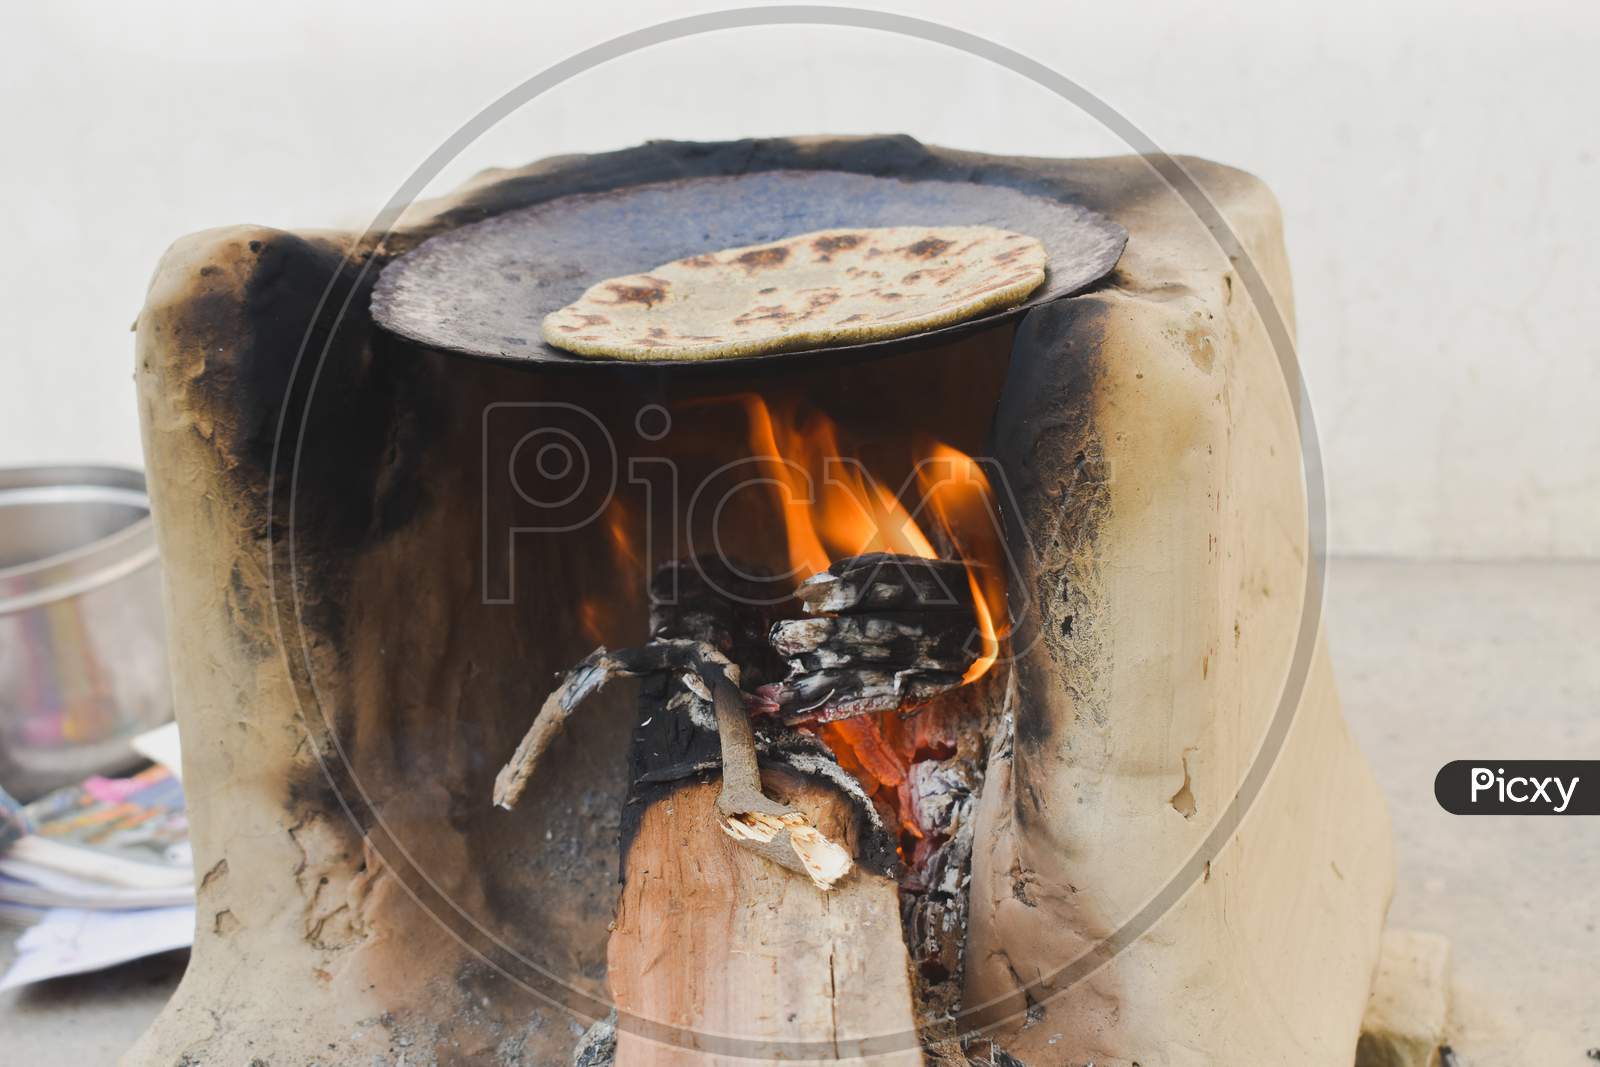 Cooking chapati the traditional way